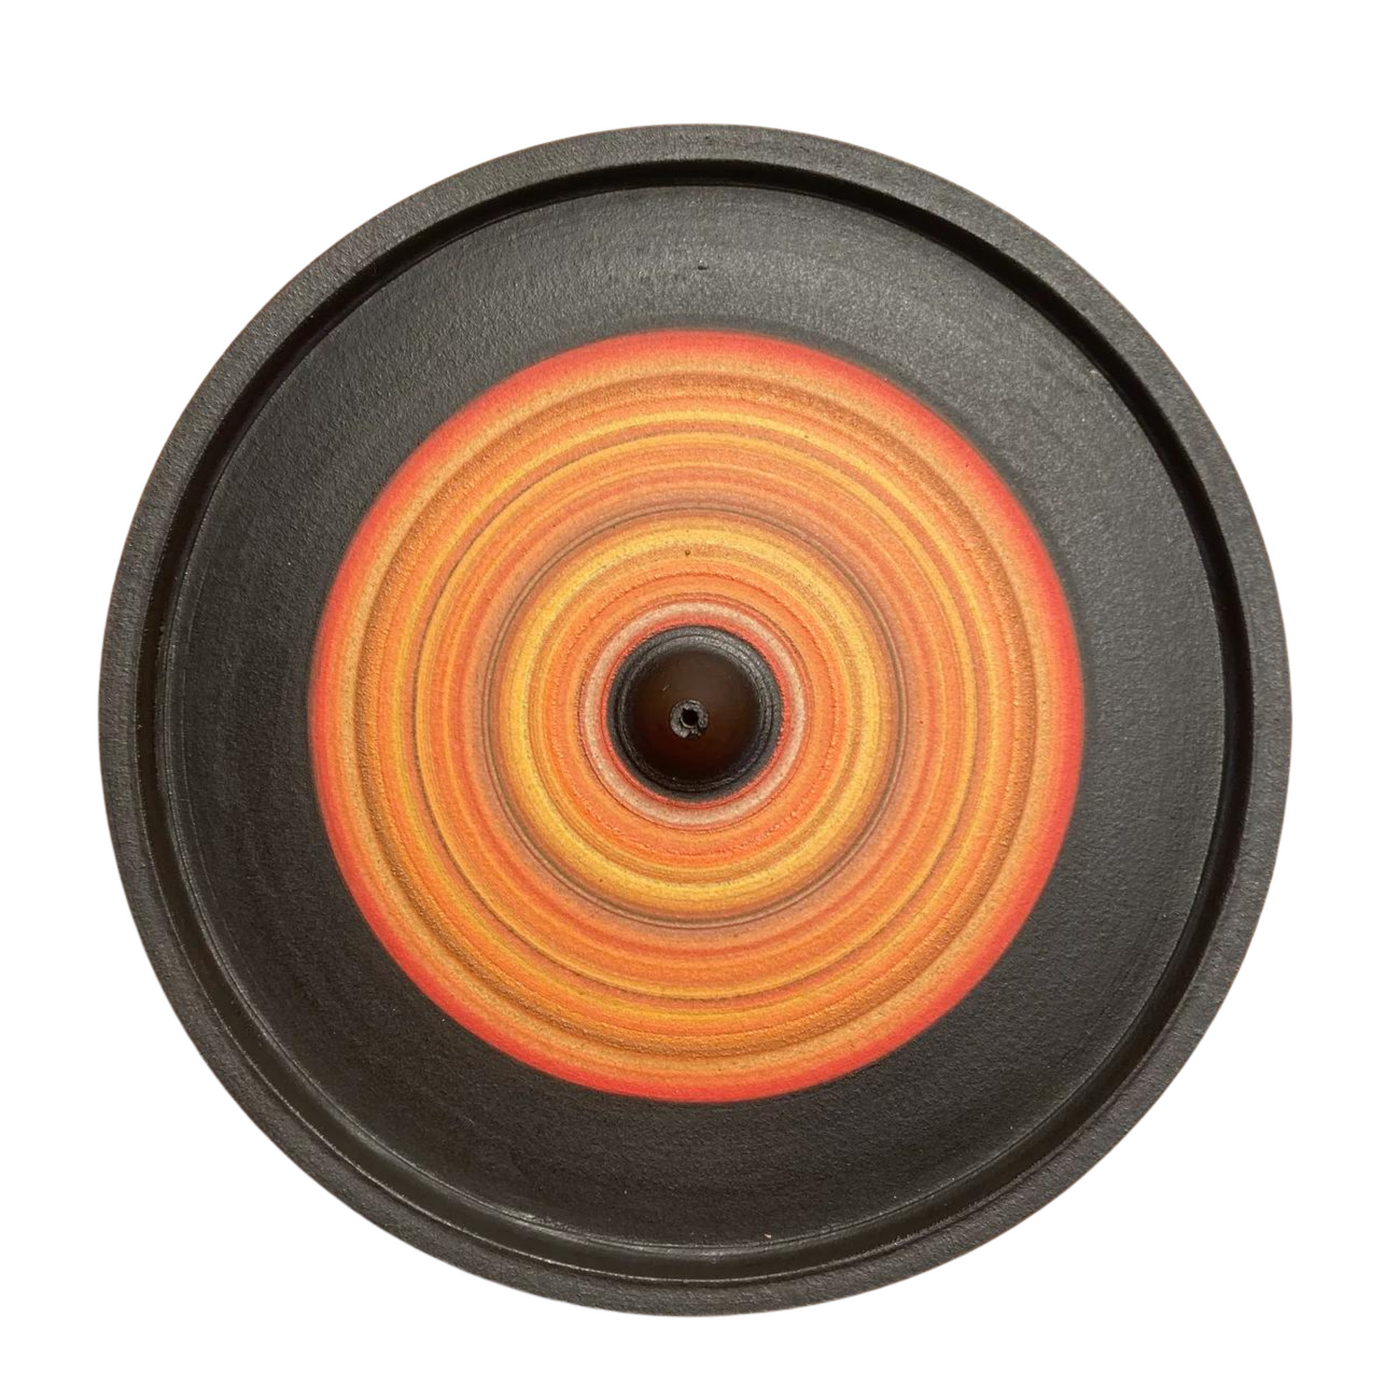 Sarah Daly Sunset Incense Holders - Radical Giving